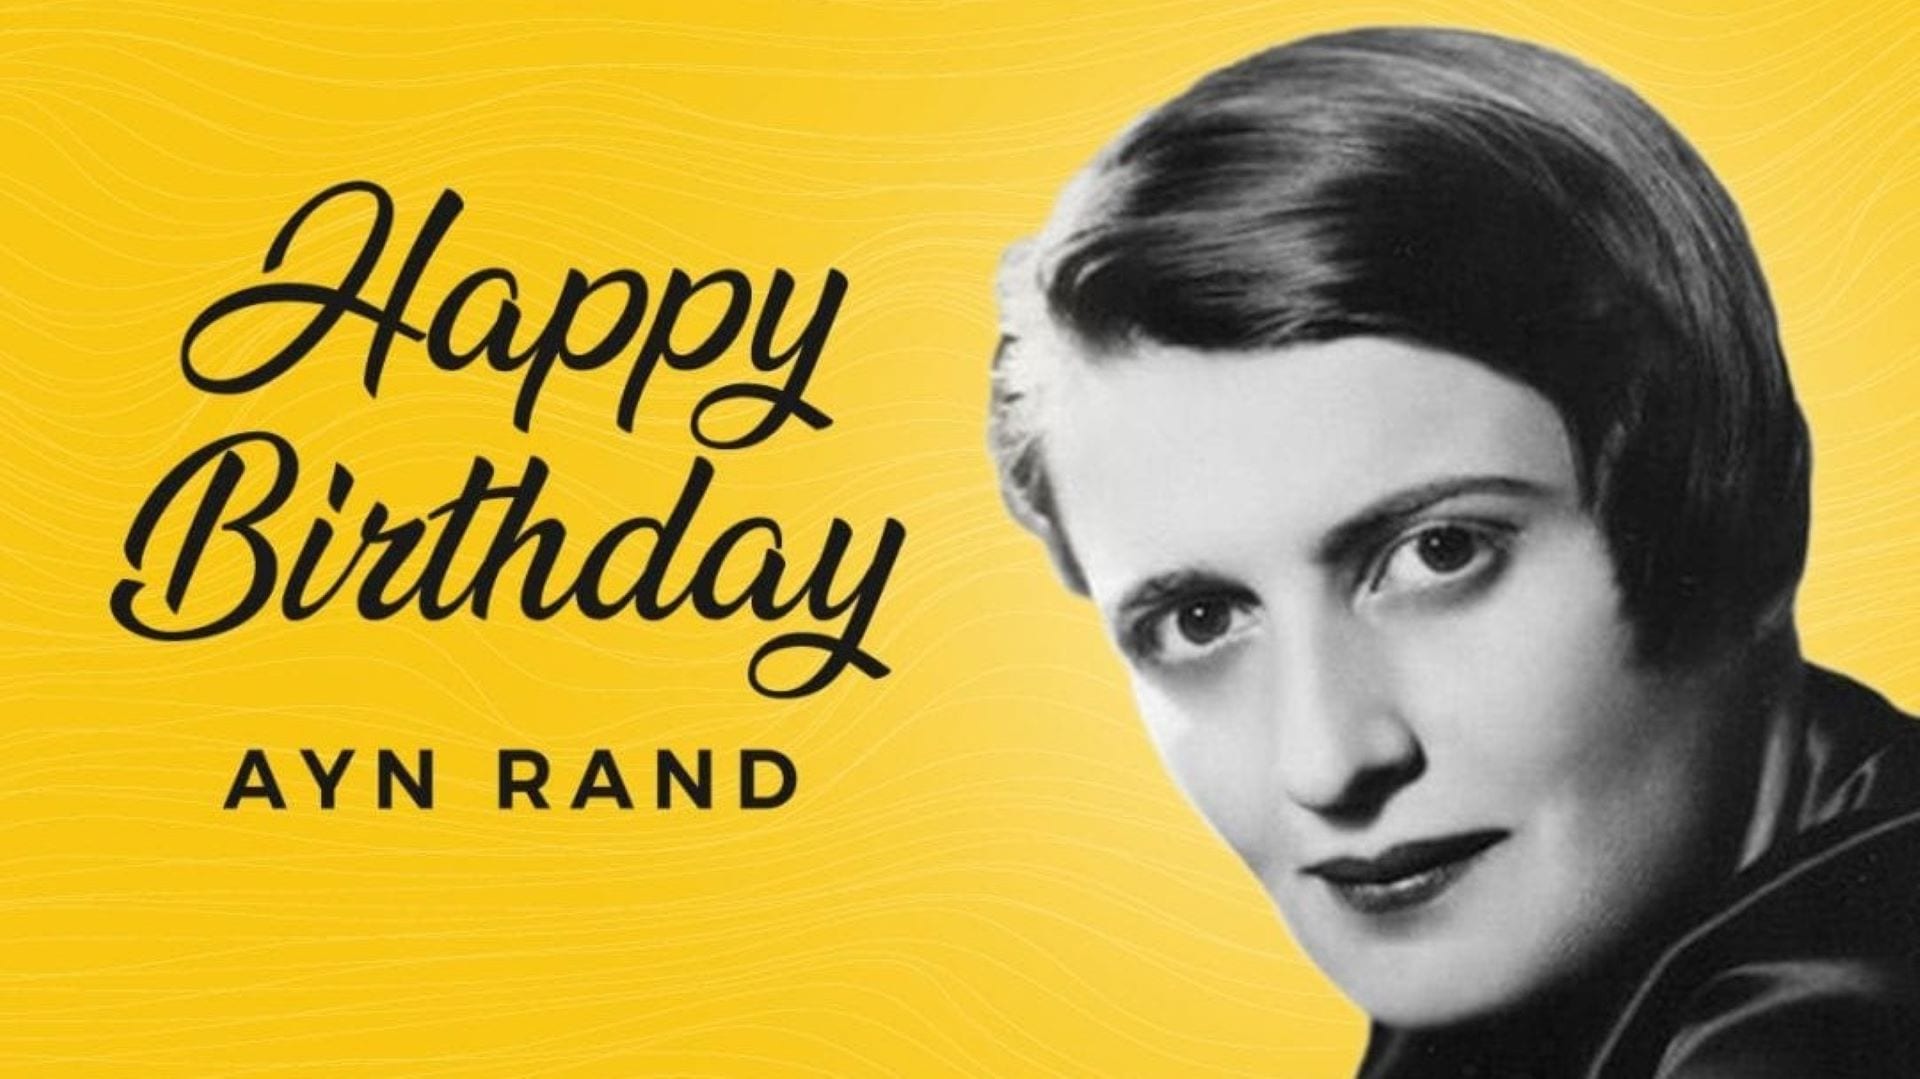 Ayn Rand, who founded the philosophy of Objectivism, has contributed immensely to modern arguments for social, economic, and civil liberties